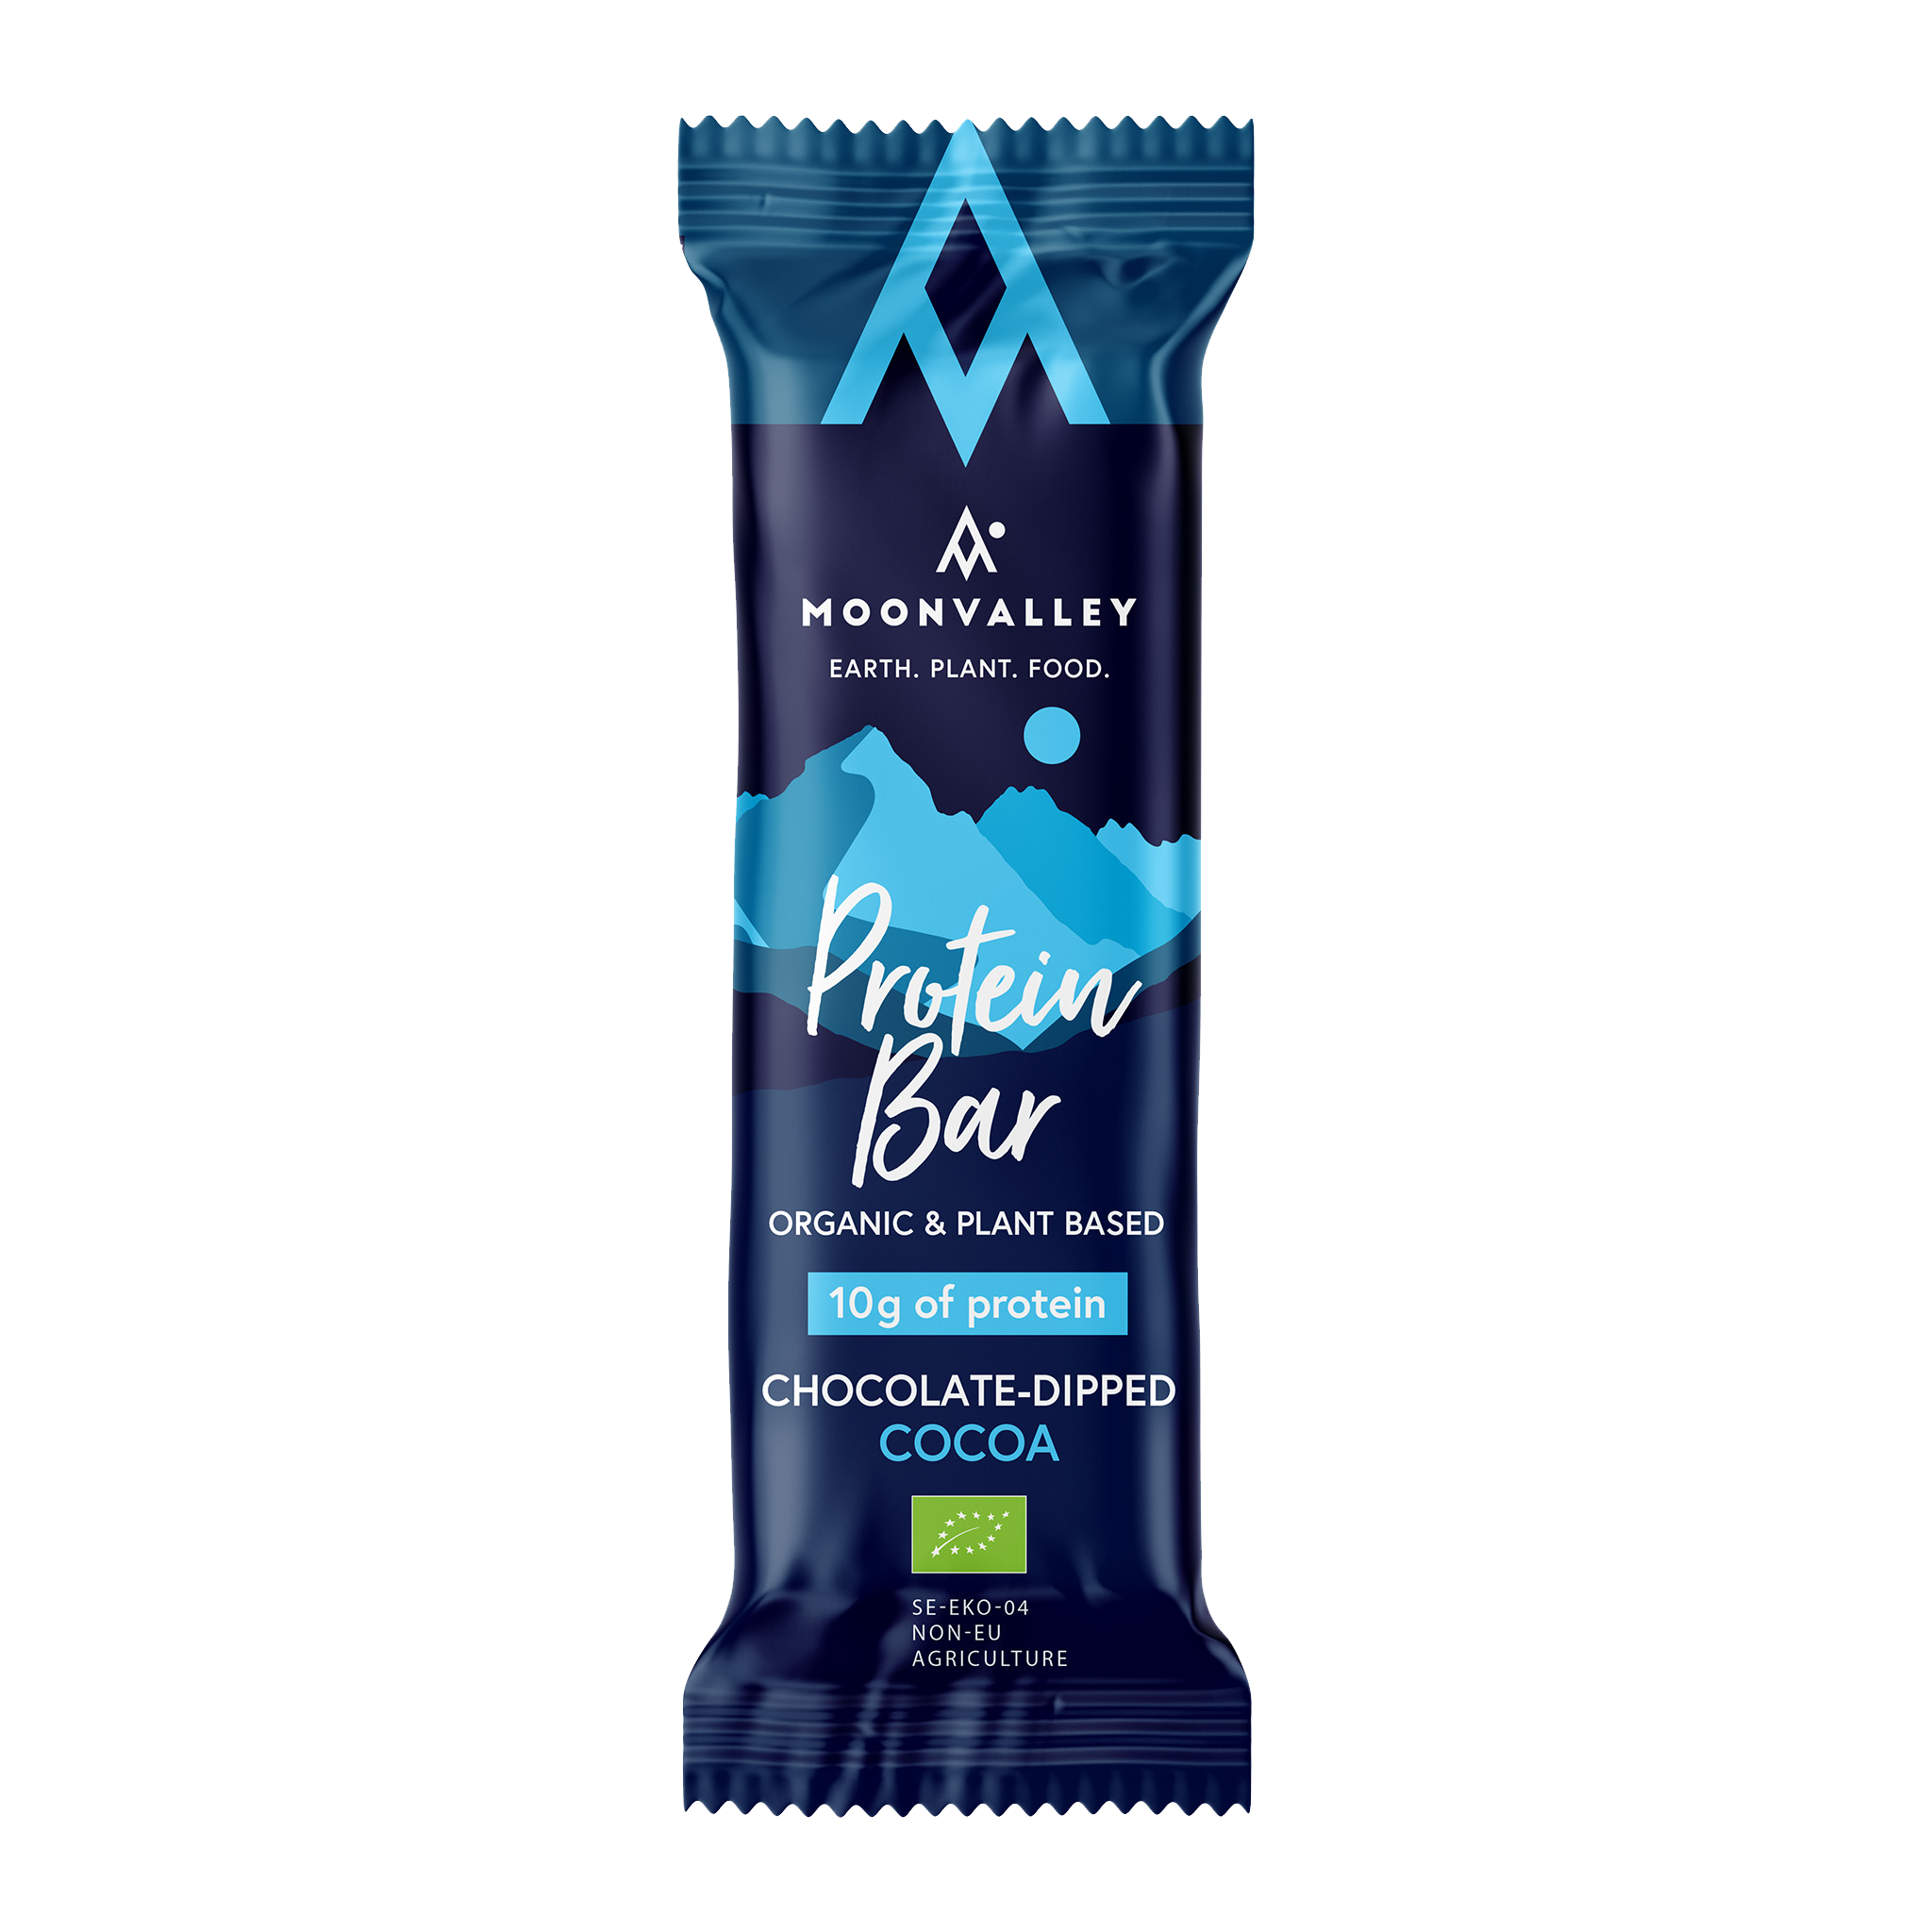 Moonvalley Proteinbar Chocolate-Dipped Cocoa